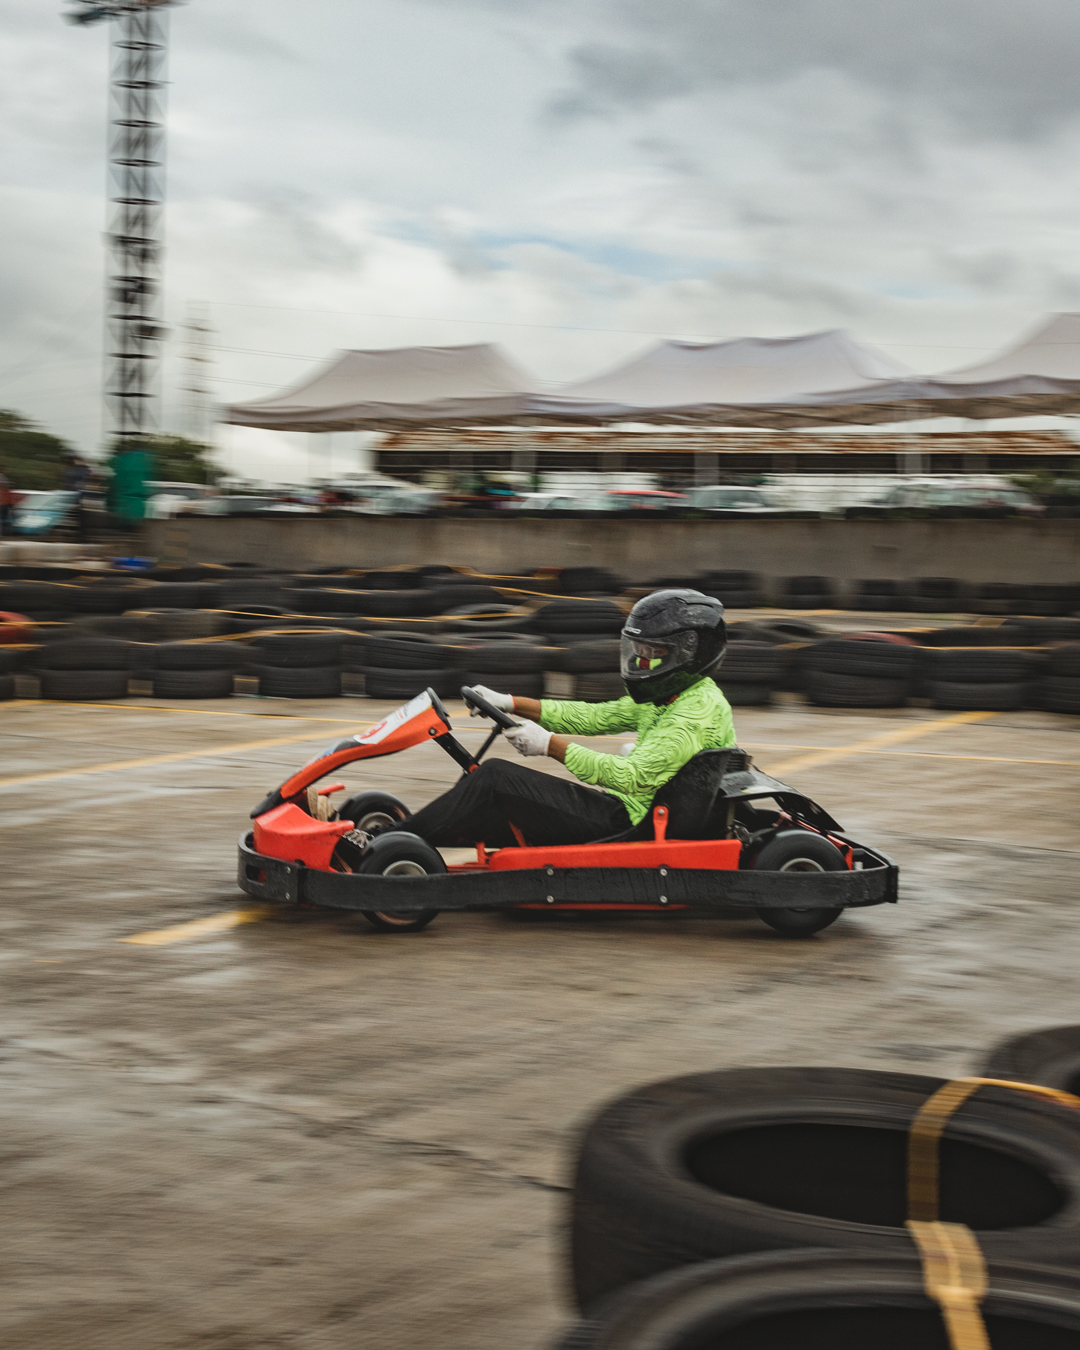 The BTS of Filming 2-day Go-Karting event